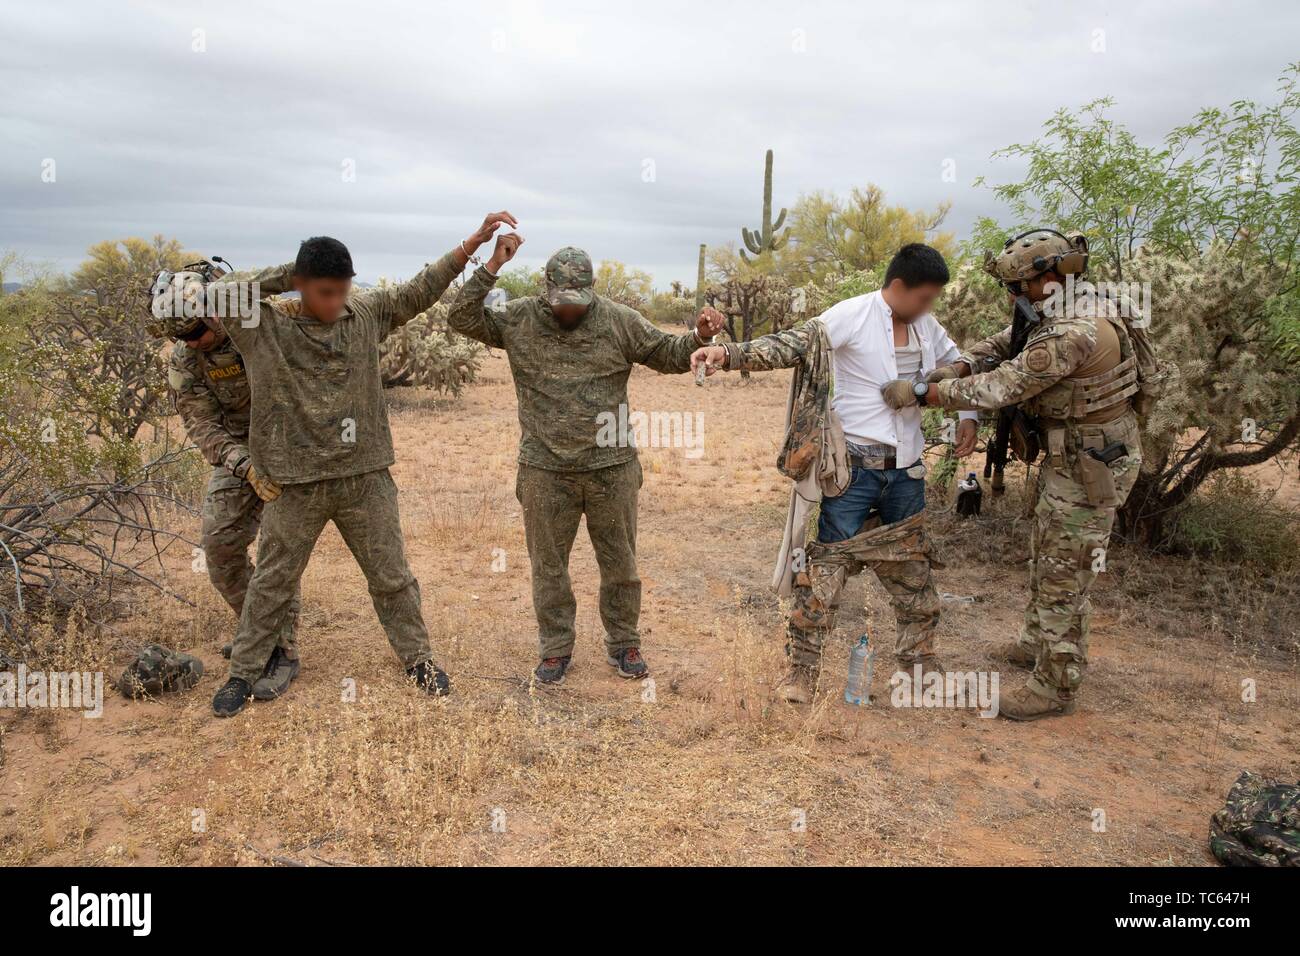 U.S. Border Patrol search a group of illegal migrants after they were apprehended crossing from Mexico on the Tohono Oʼodham Indian Reservation May 22, 2019 near Pisinemo, Arizona. The faces are obscured by the Border Patrol to protect their identity. Stock Photo